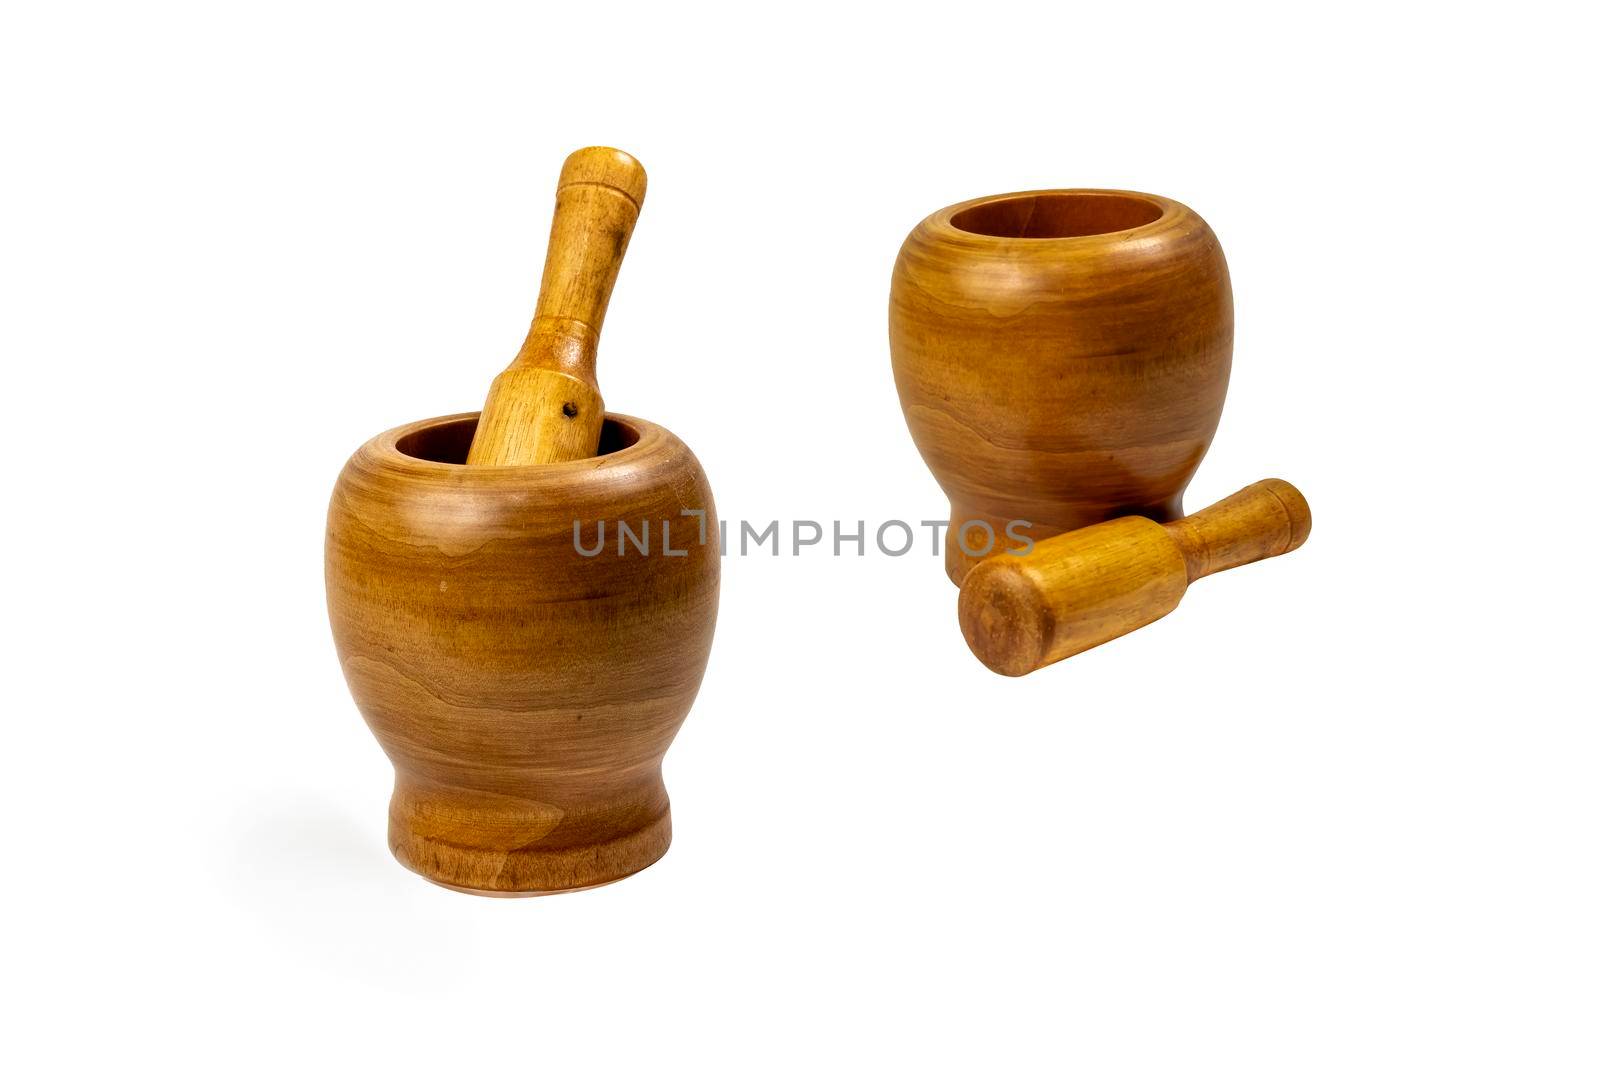 This wooden mortar can be used to crush and grind various grains with a pestle.